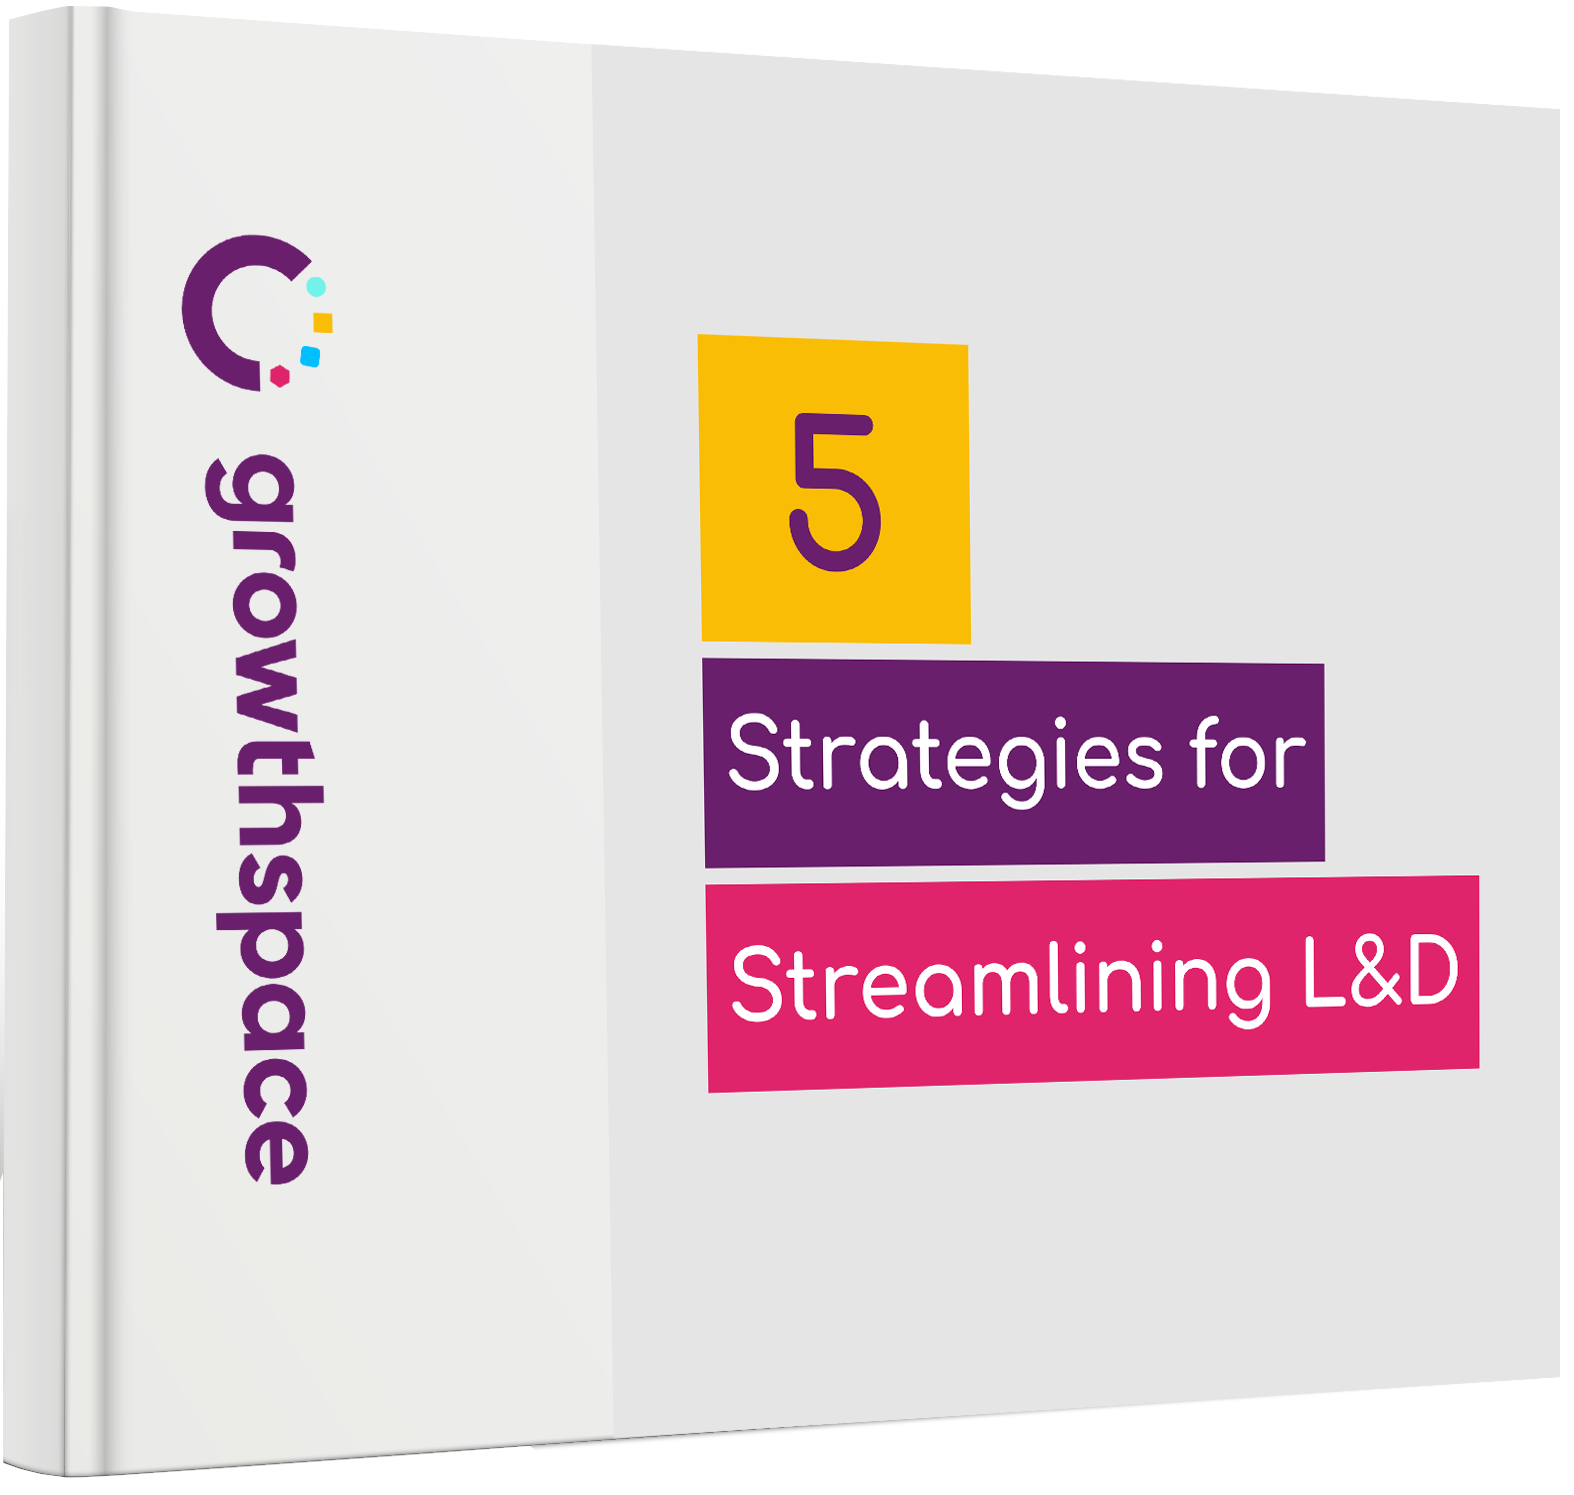 5 Strategies for Streamlining L&D image2 copy-1